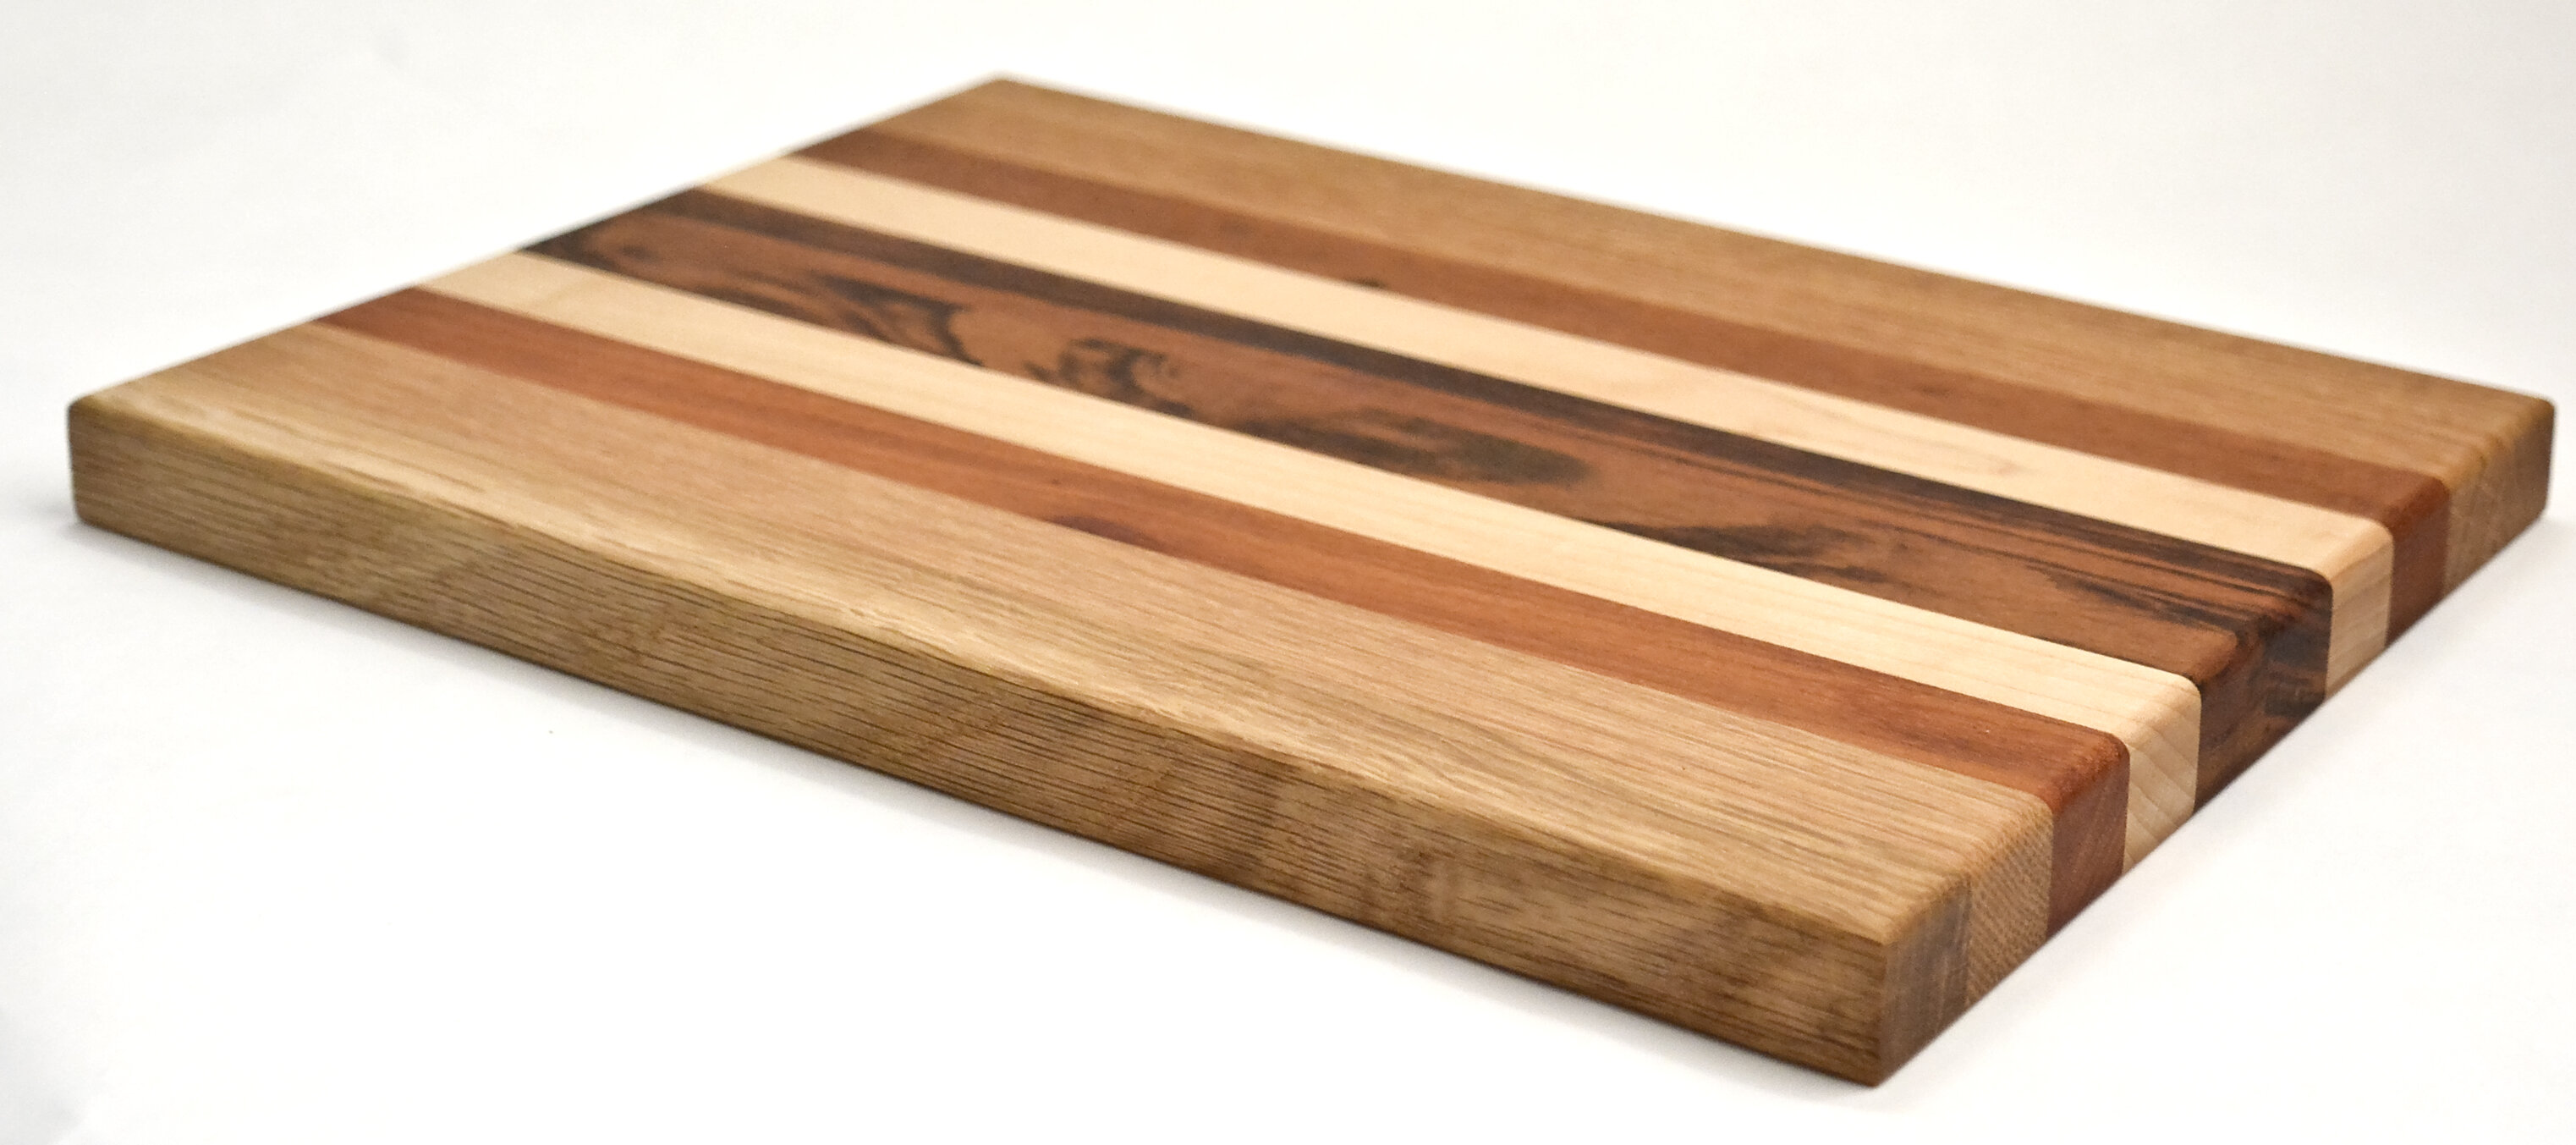 Why do chefs use wooden cutting boards?